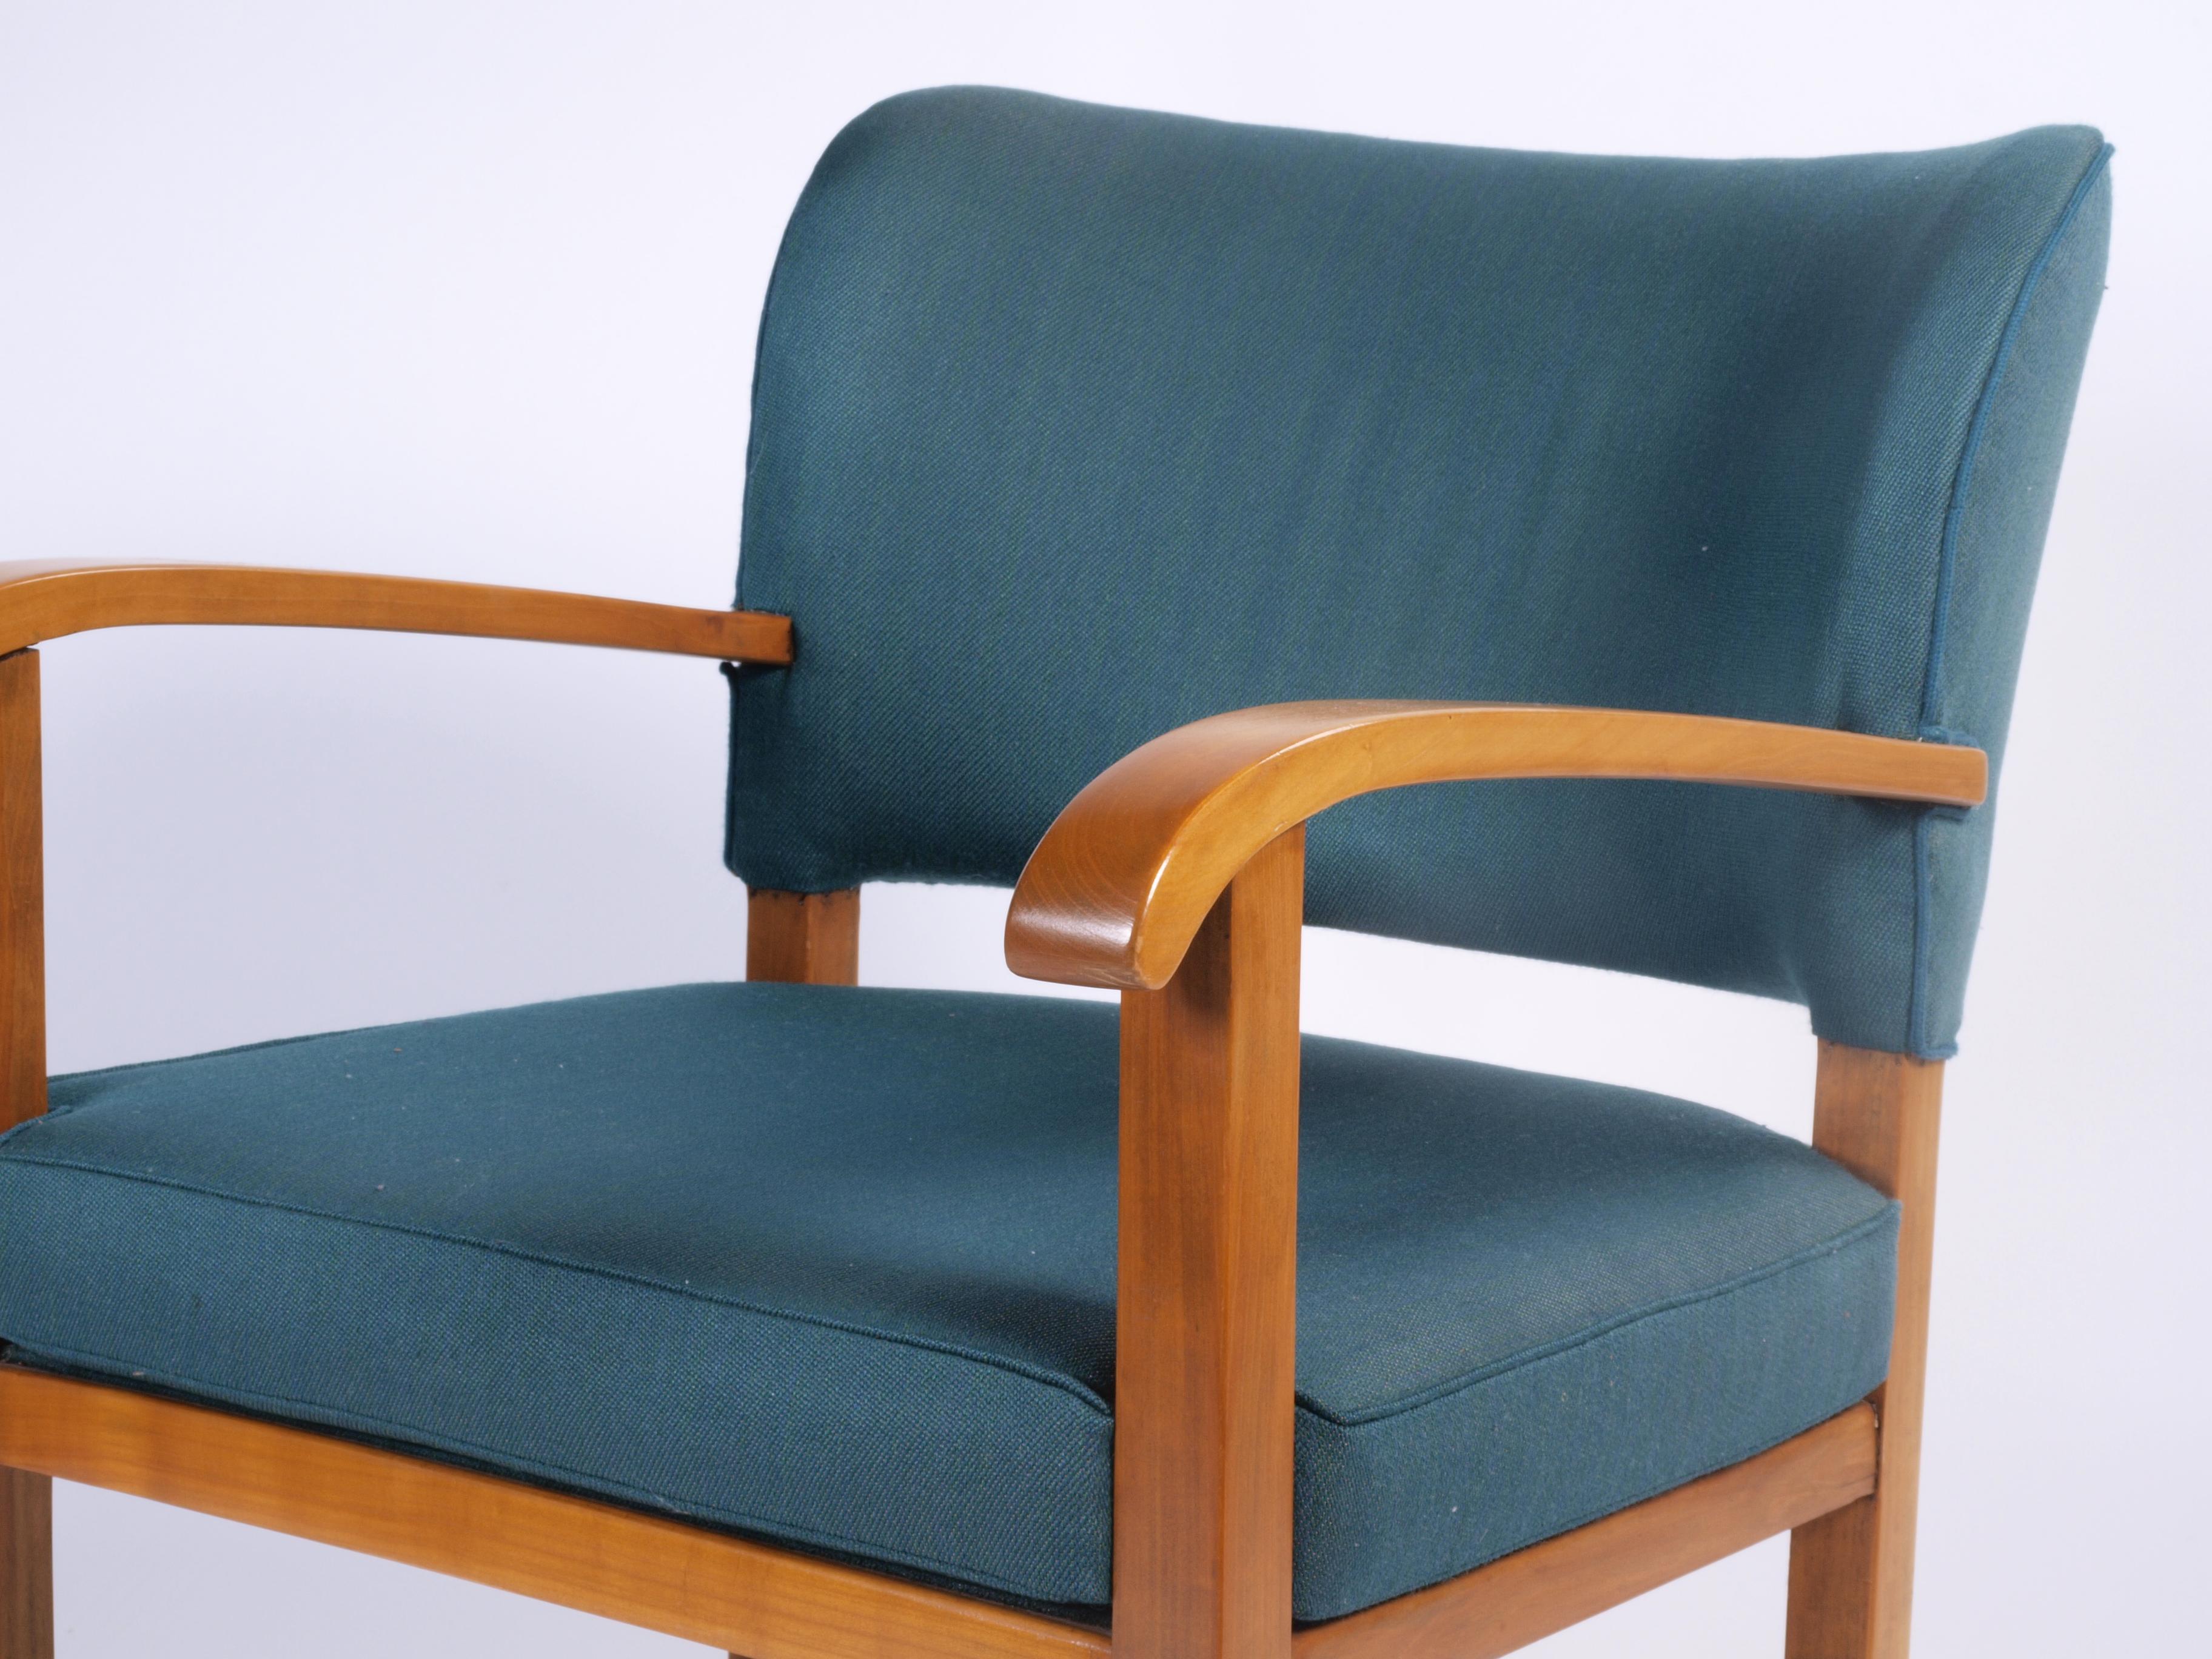 These early mid-century chairs showcase timeless design, marked by a 